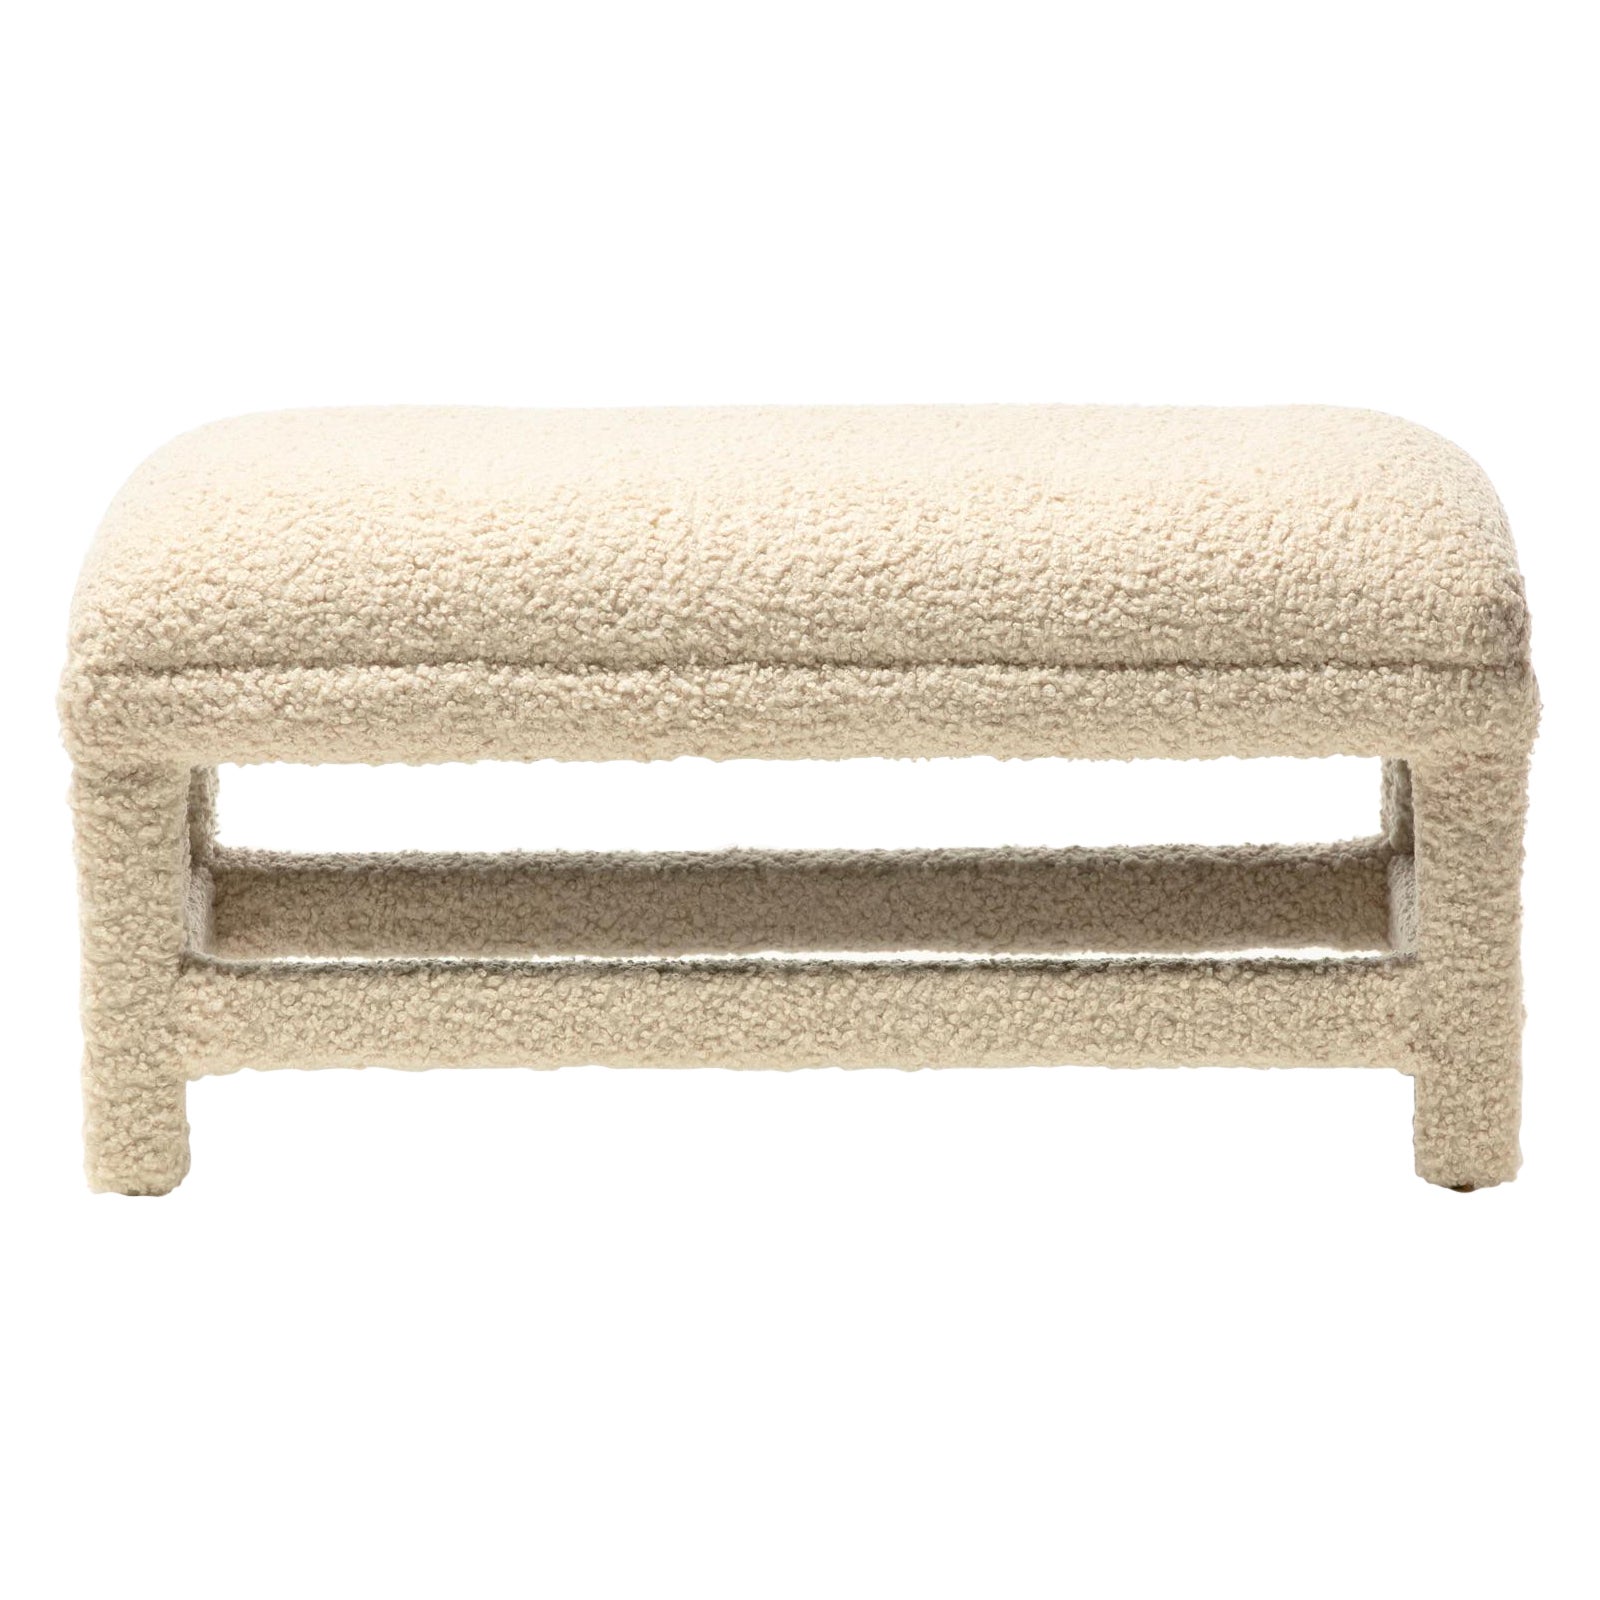 Post Modern Milo Baughman Parsons Style Bench in Ivory White Bouclé, circa 1980s For Sale